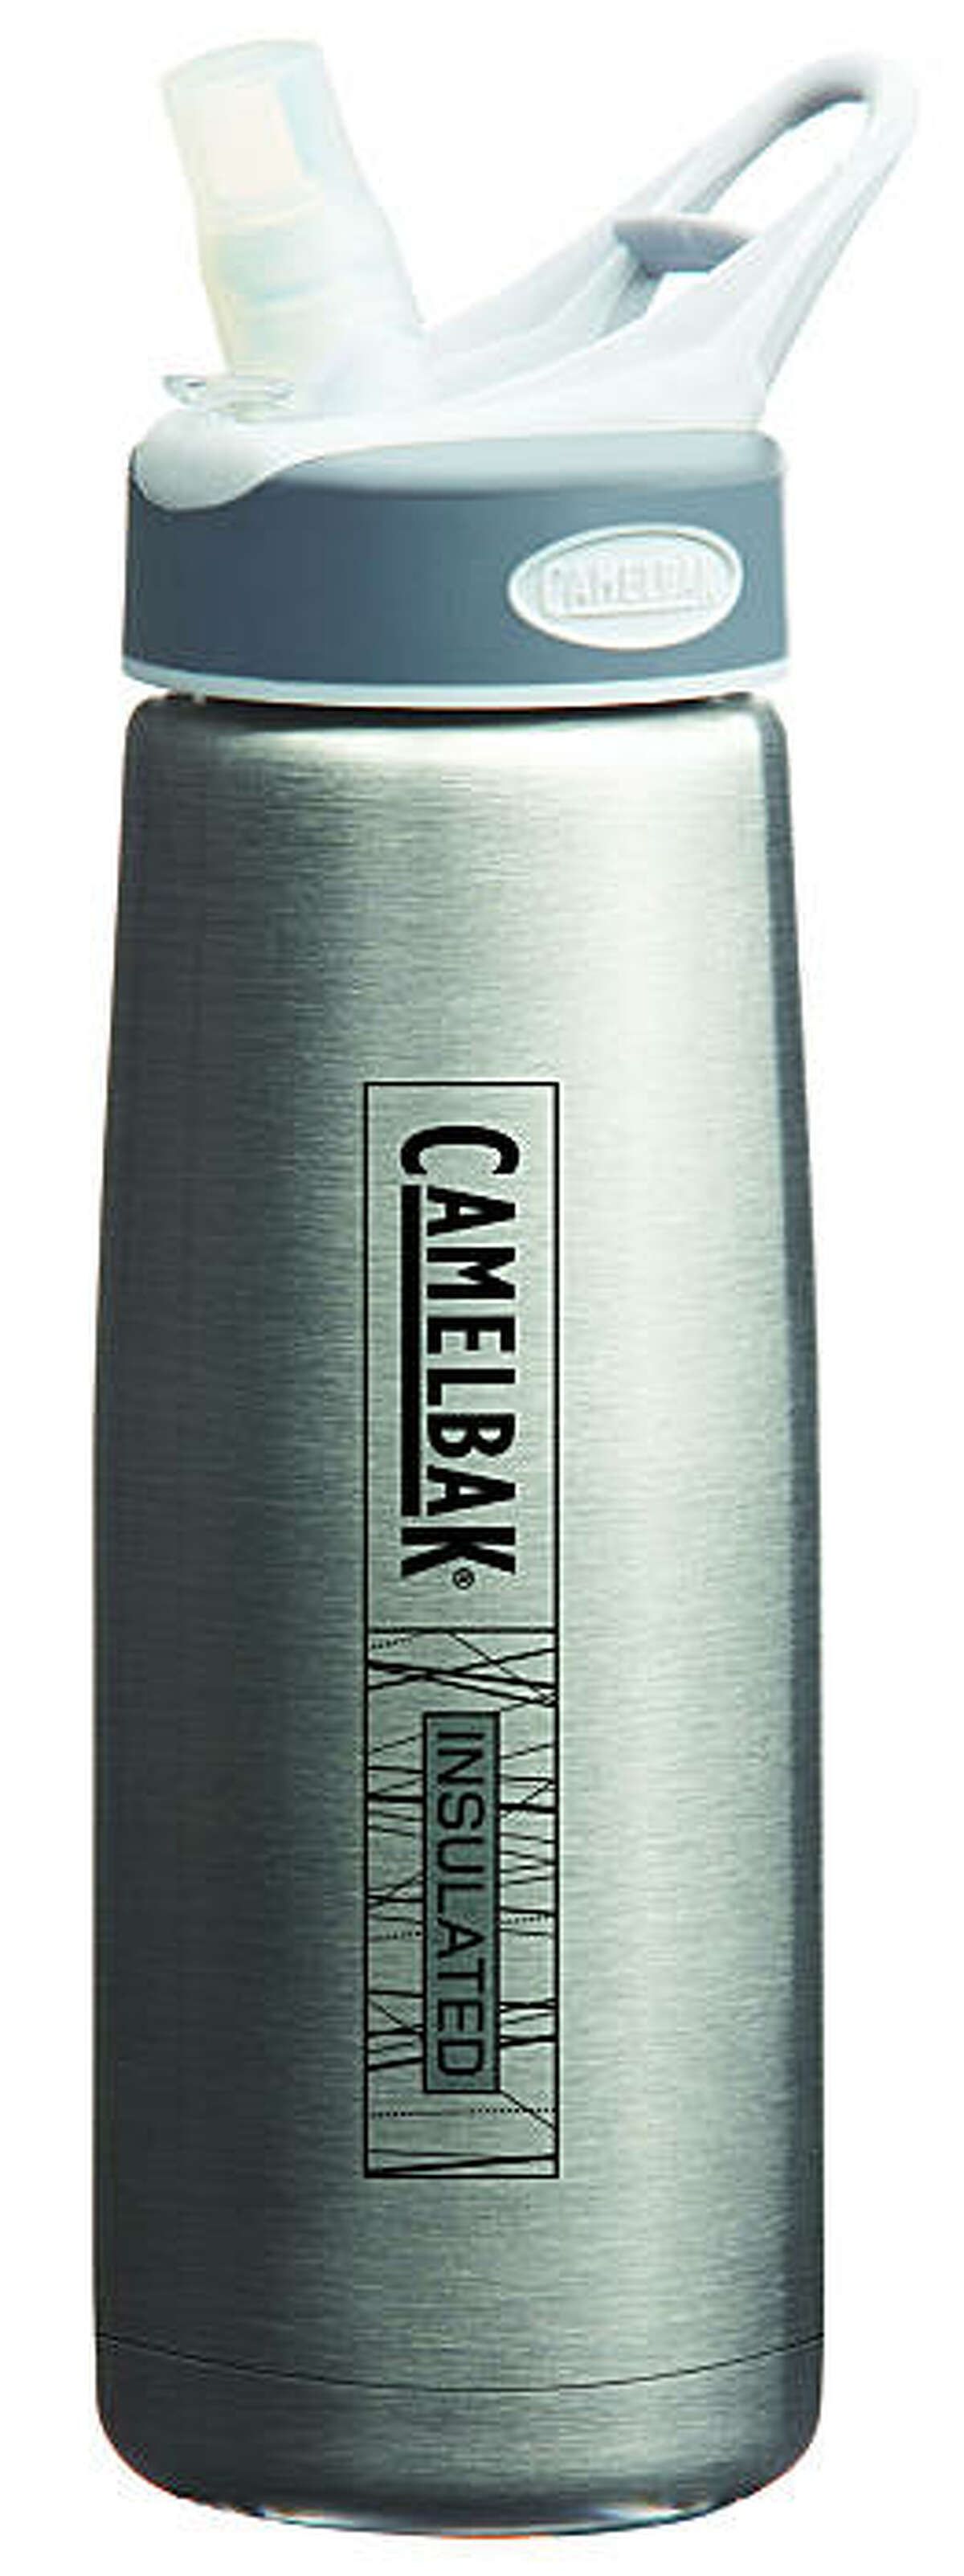 CamelBak’s “Steel of a Deal” promotion.